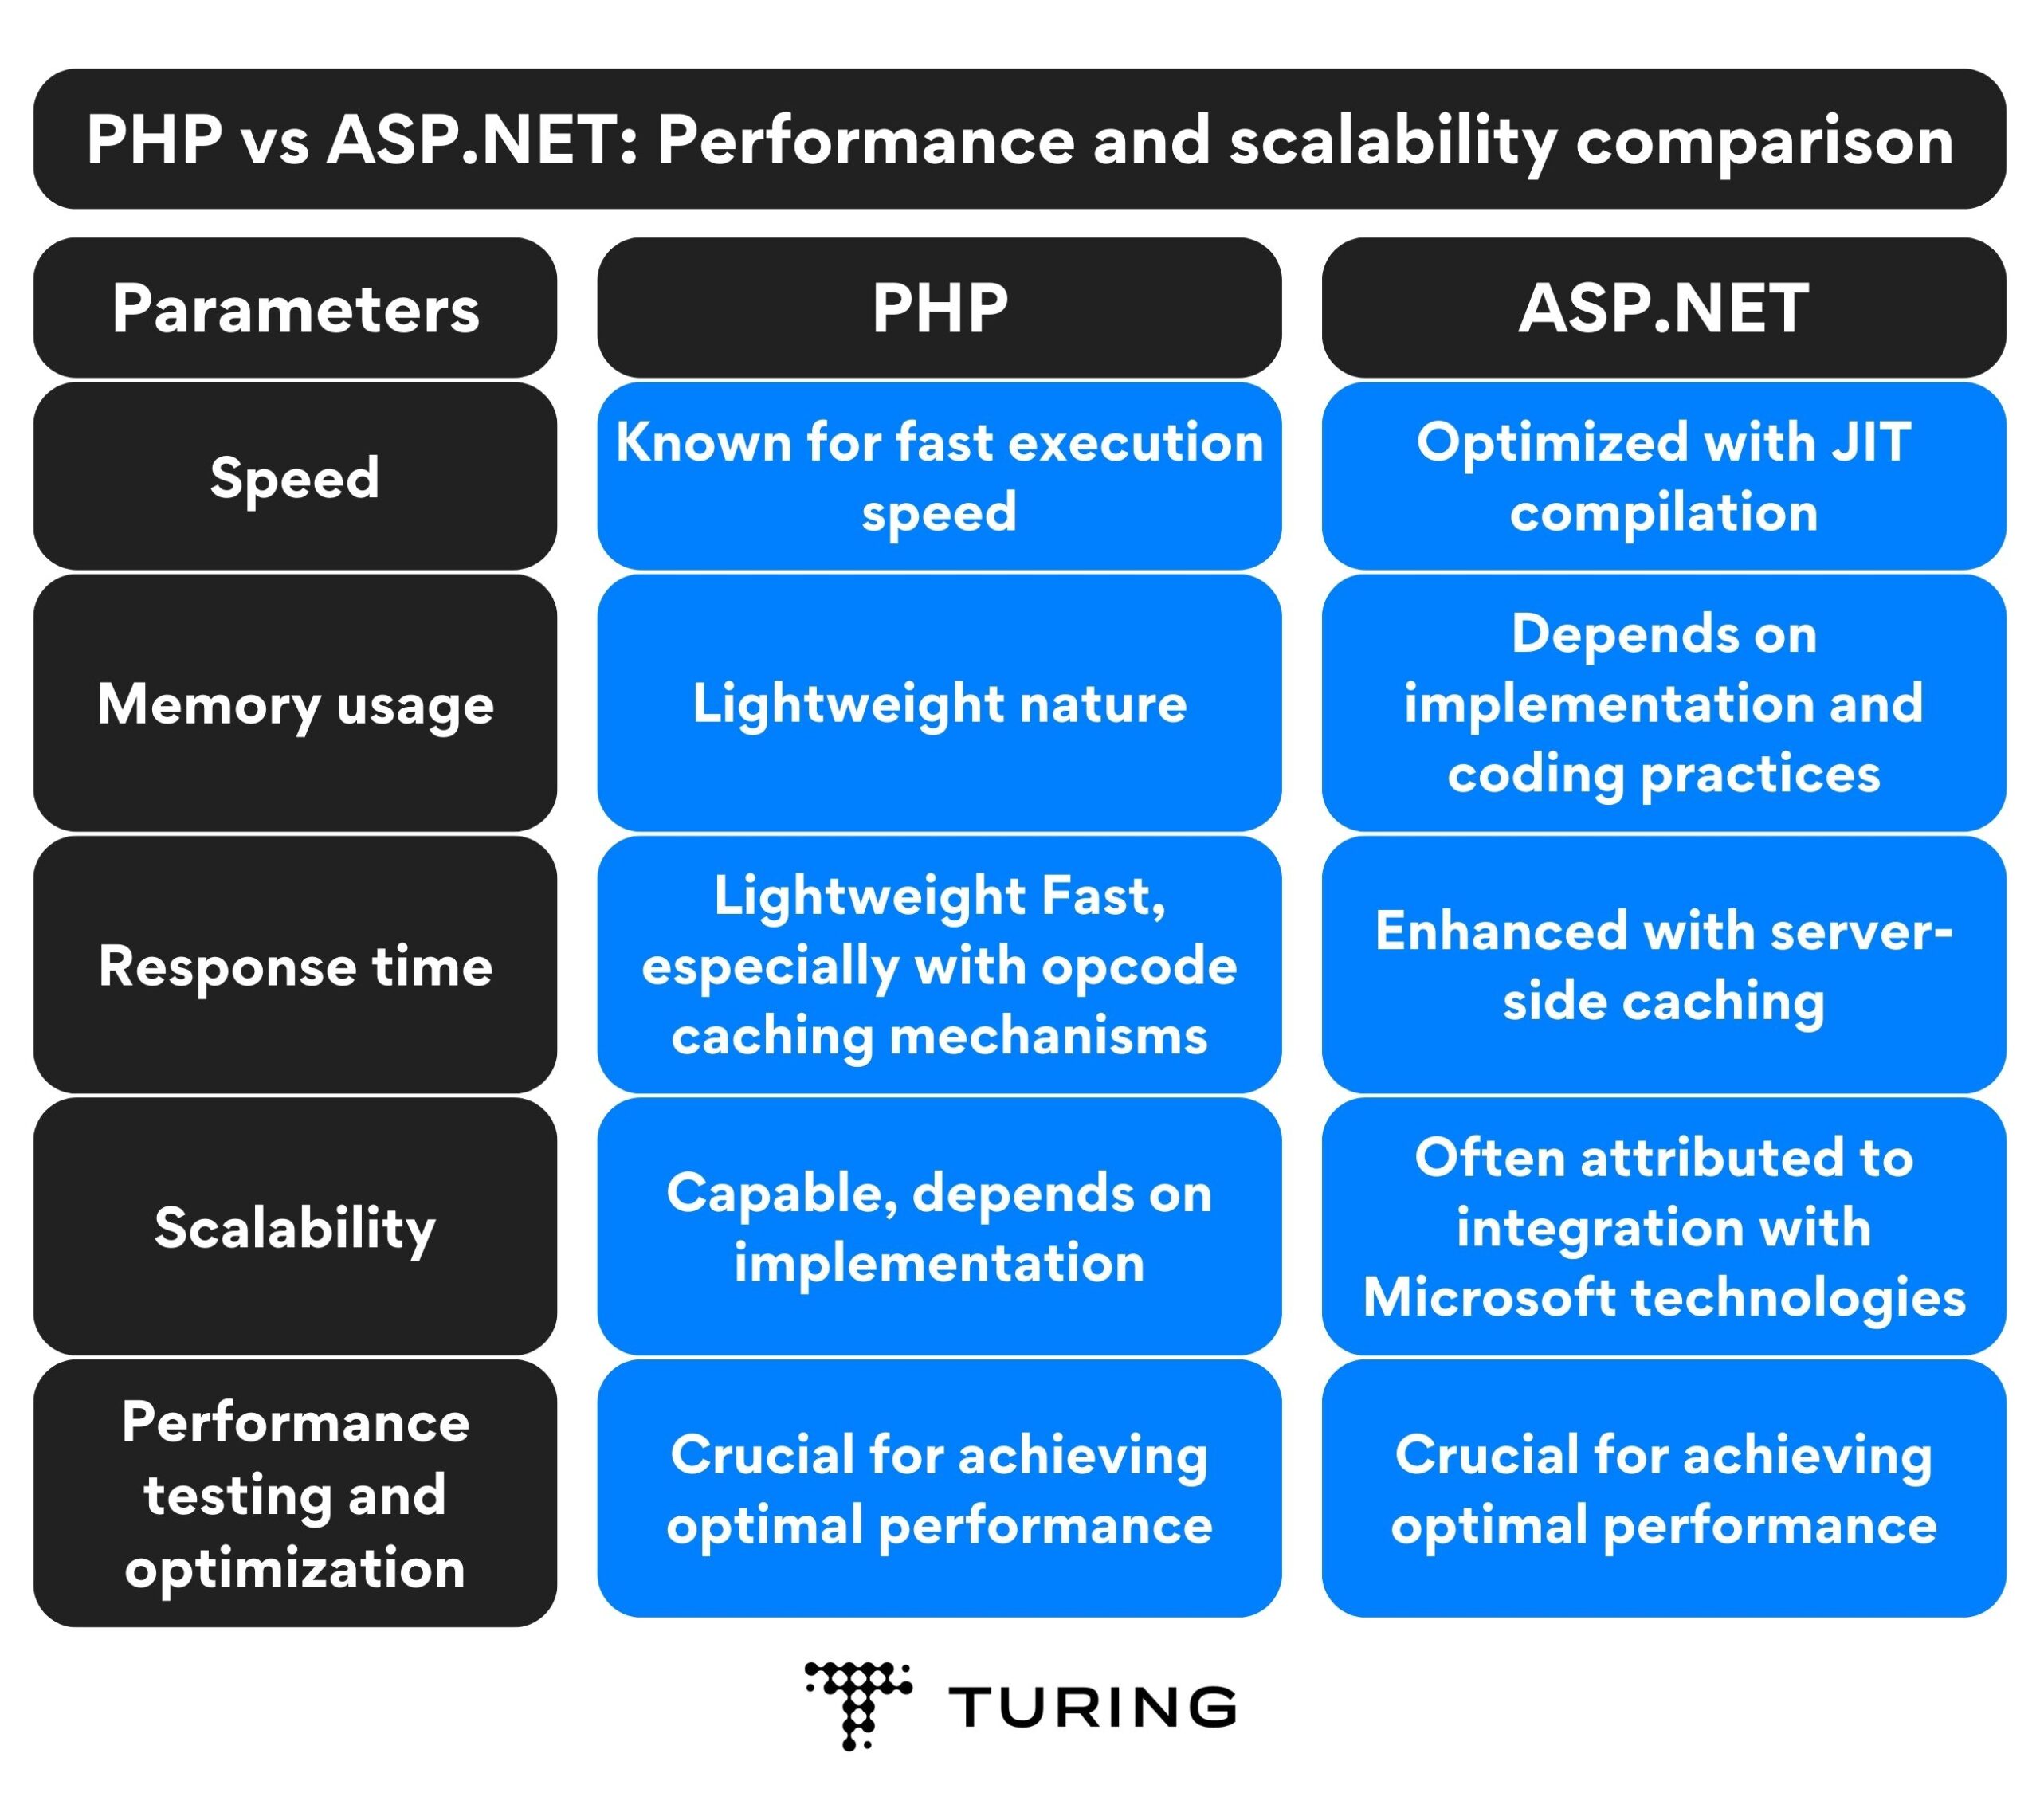 PHP vs ASP.NET: Performance and scalability comparison